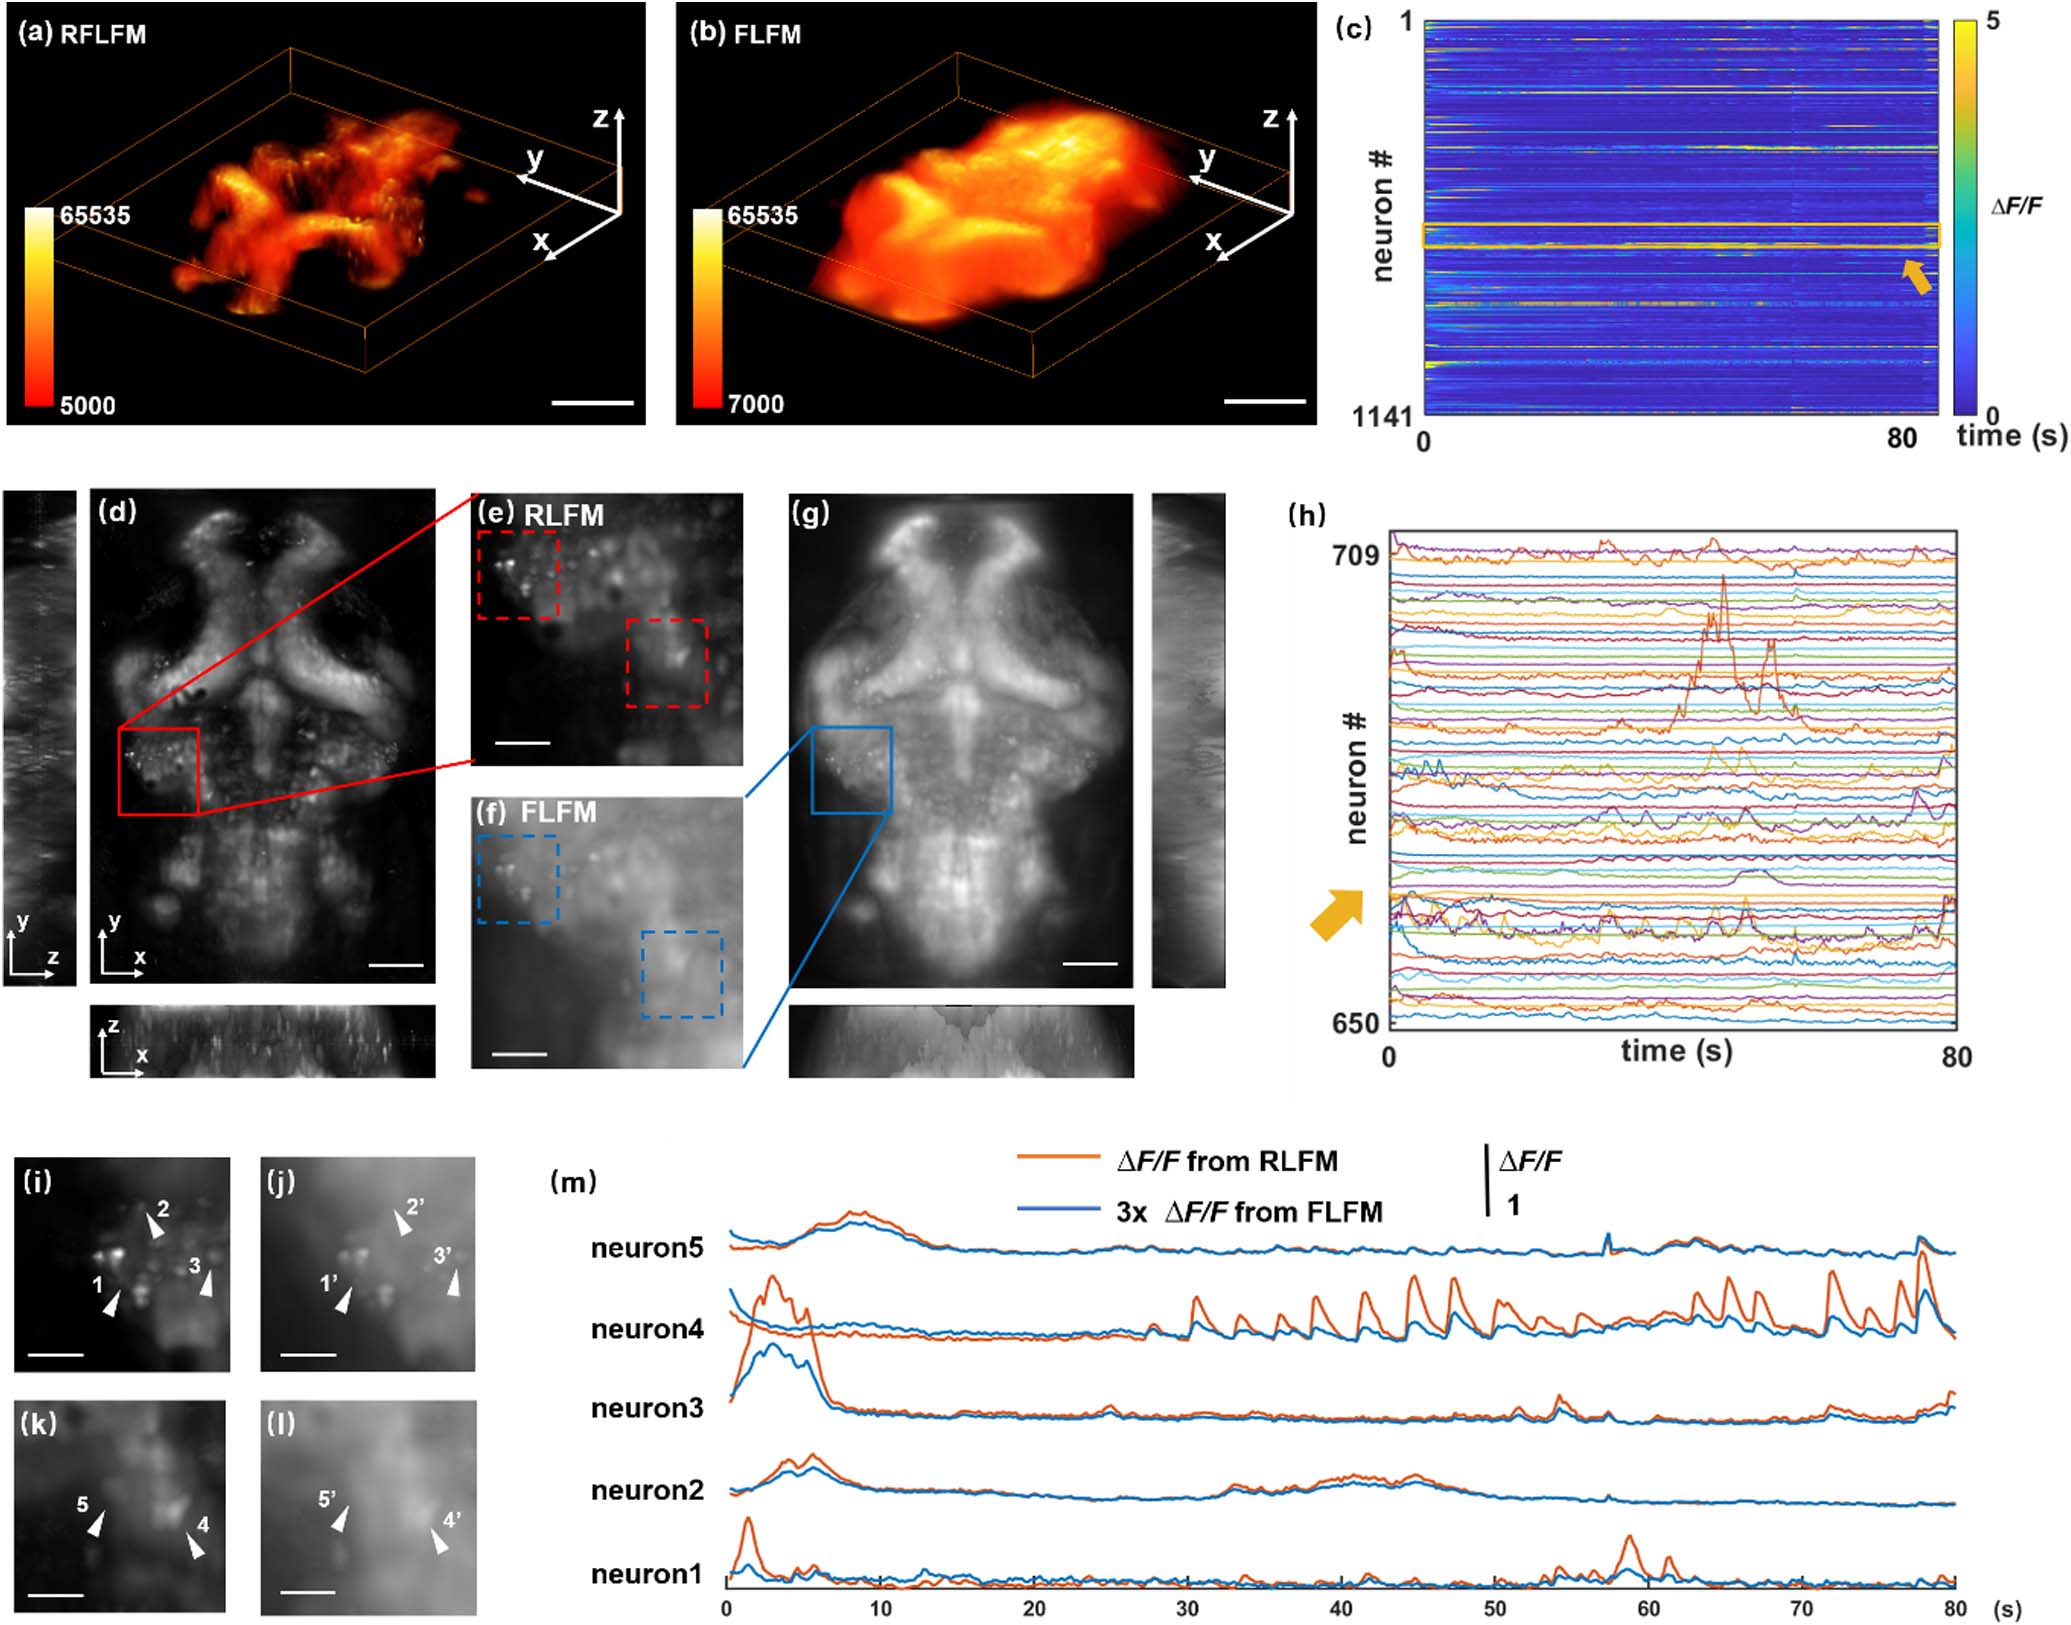 High-contrast volumetric imaging of neural network activity in the brains of larval zebrafish in vivo. The imaging depth is centered at about tens of microns below the brain surface of the zebrafish. (a) and (b) Maximum intensity projects (MIPs) over recording time in the 4D (x–y–z–t) domain, captured by RFLFM and FLFM modes, respectively. Scale bar: 150 μm. (c) Fluorescence signals of neurons, based on RFLFM reconstructed images. The activity shows a visible increase at about 57 s and 75 s. (d) 3D projection of (a) in different orthogonal planes. Scale bar: 60 μm. (g) 3D projection of (b) in different orthogonal planes. Scale bar: 60 μm. (e) and (f) Zoom-in views of the regions in boxes of (d) and (g), respectively. Scale bar: 20 μm. (h) Zoom-in view of orange box indicating the activity of 60 neurons in (c). (i)–(l) Zoom-in views of the regions in boxes of (e) and (f), where the arrows indicate the neurons. Scale bar: 10 μm. (m) Calcium tracings of five neurons, indicated in (i)–(l). The orange line indicates signals achieved in RFLFM and the blue line indicates signals enlarged three times achieved in FLFM.